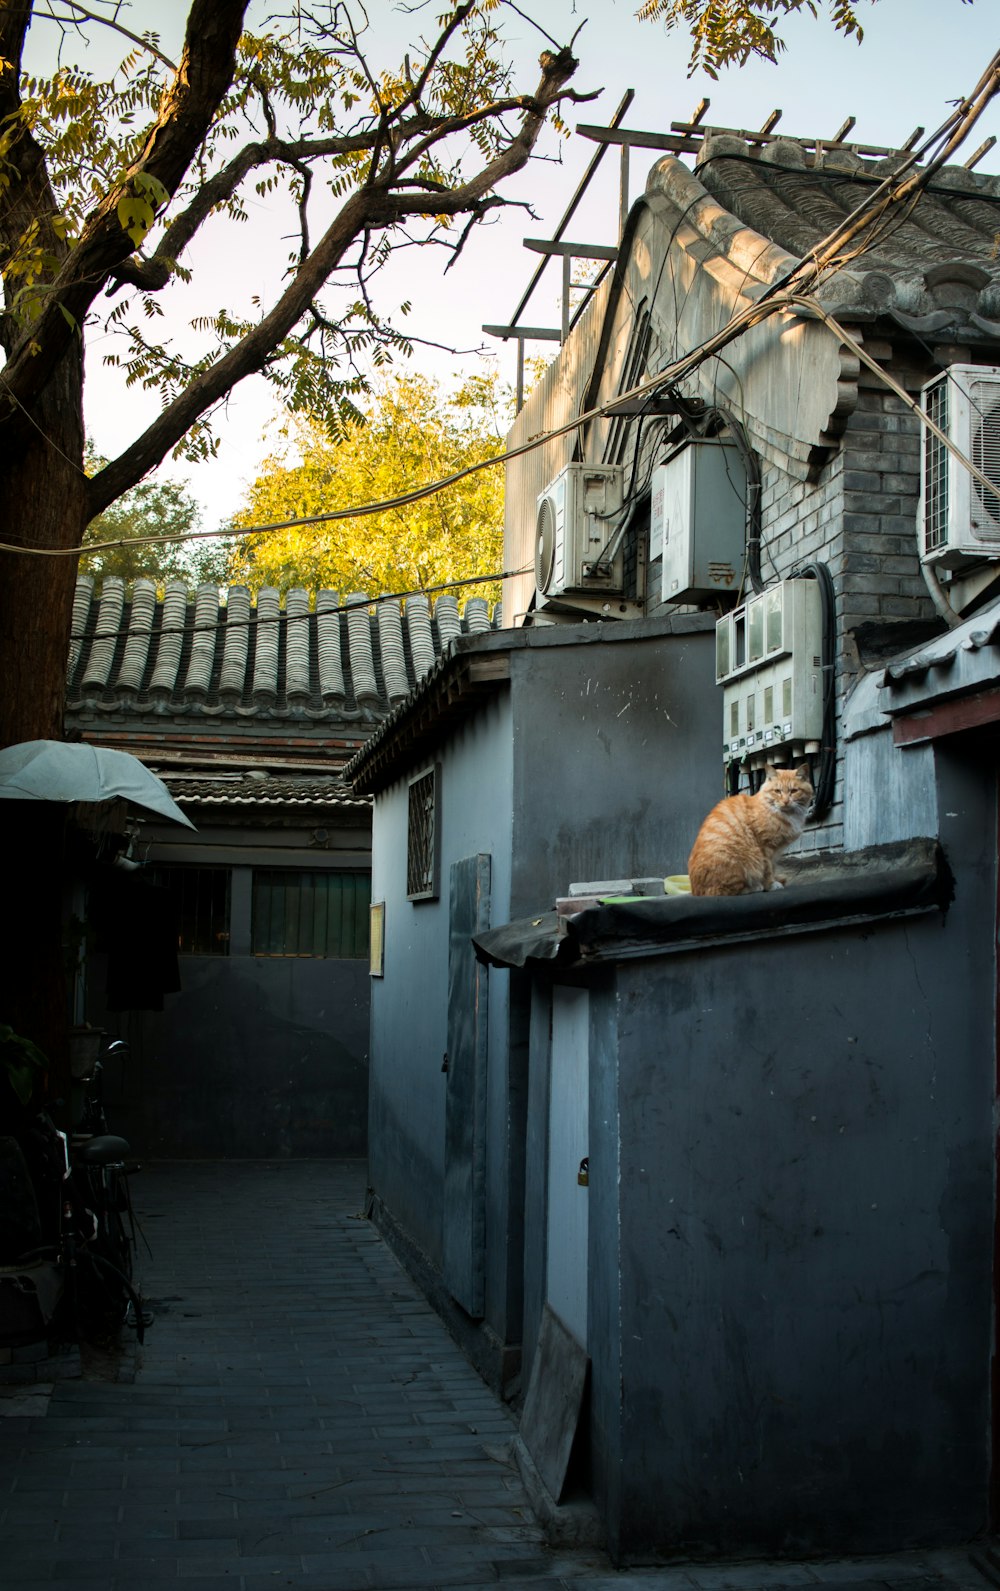 brown tabby cat on gray concrete building during daytime